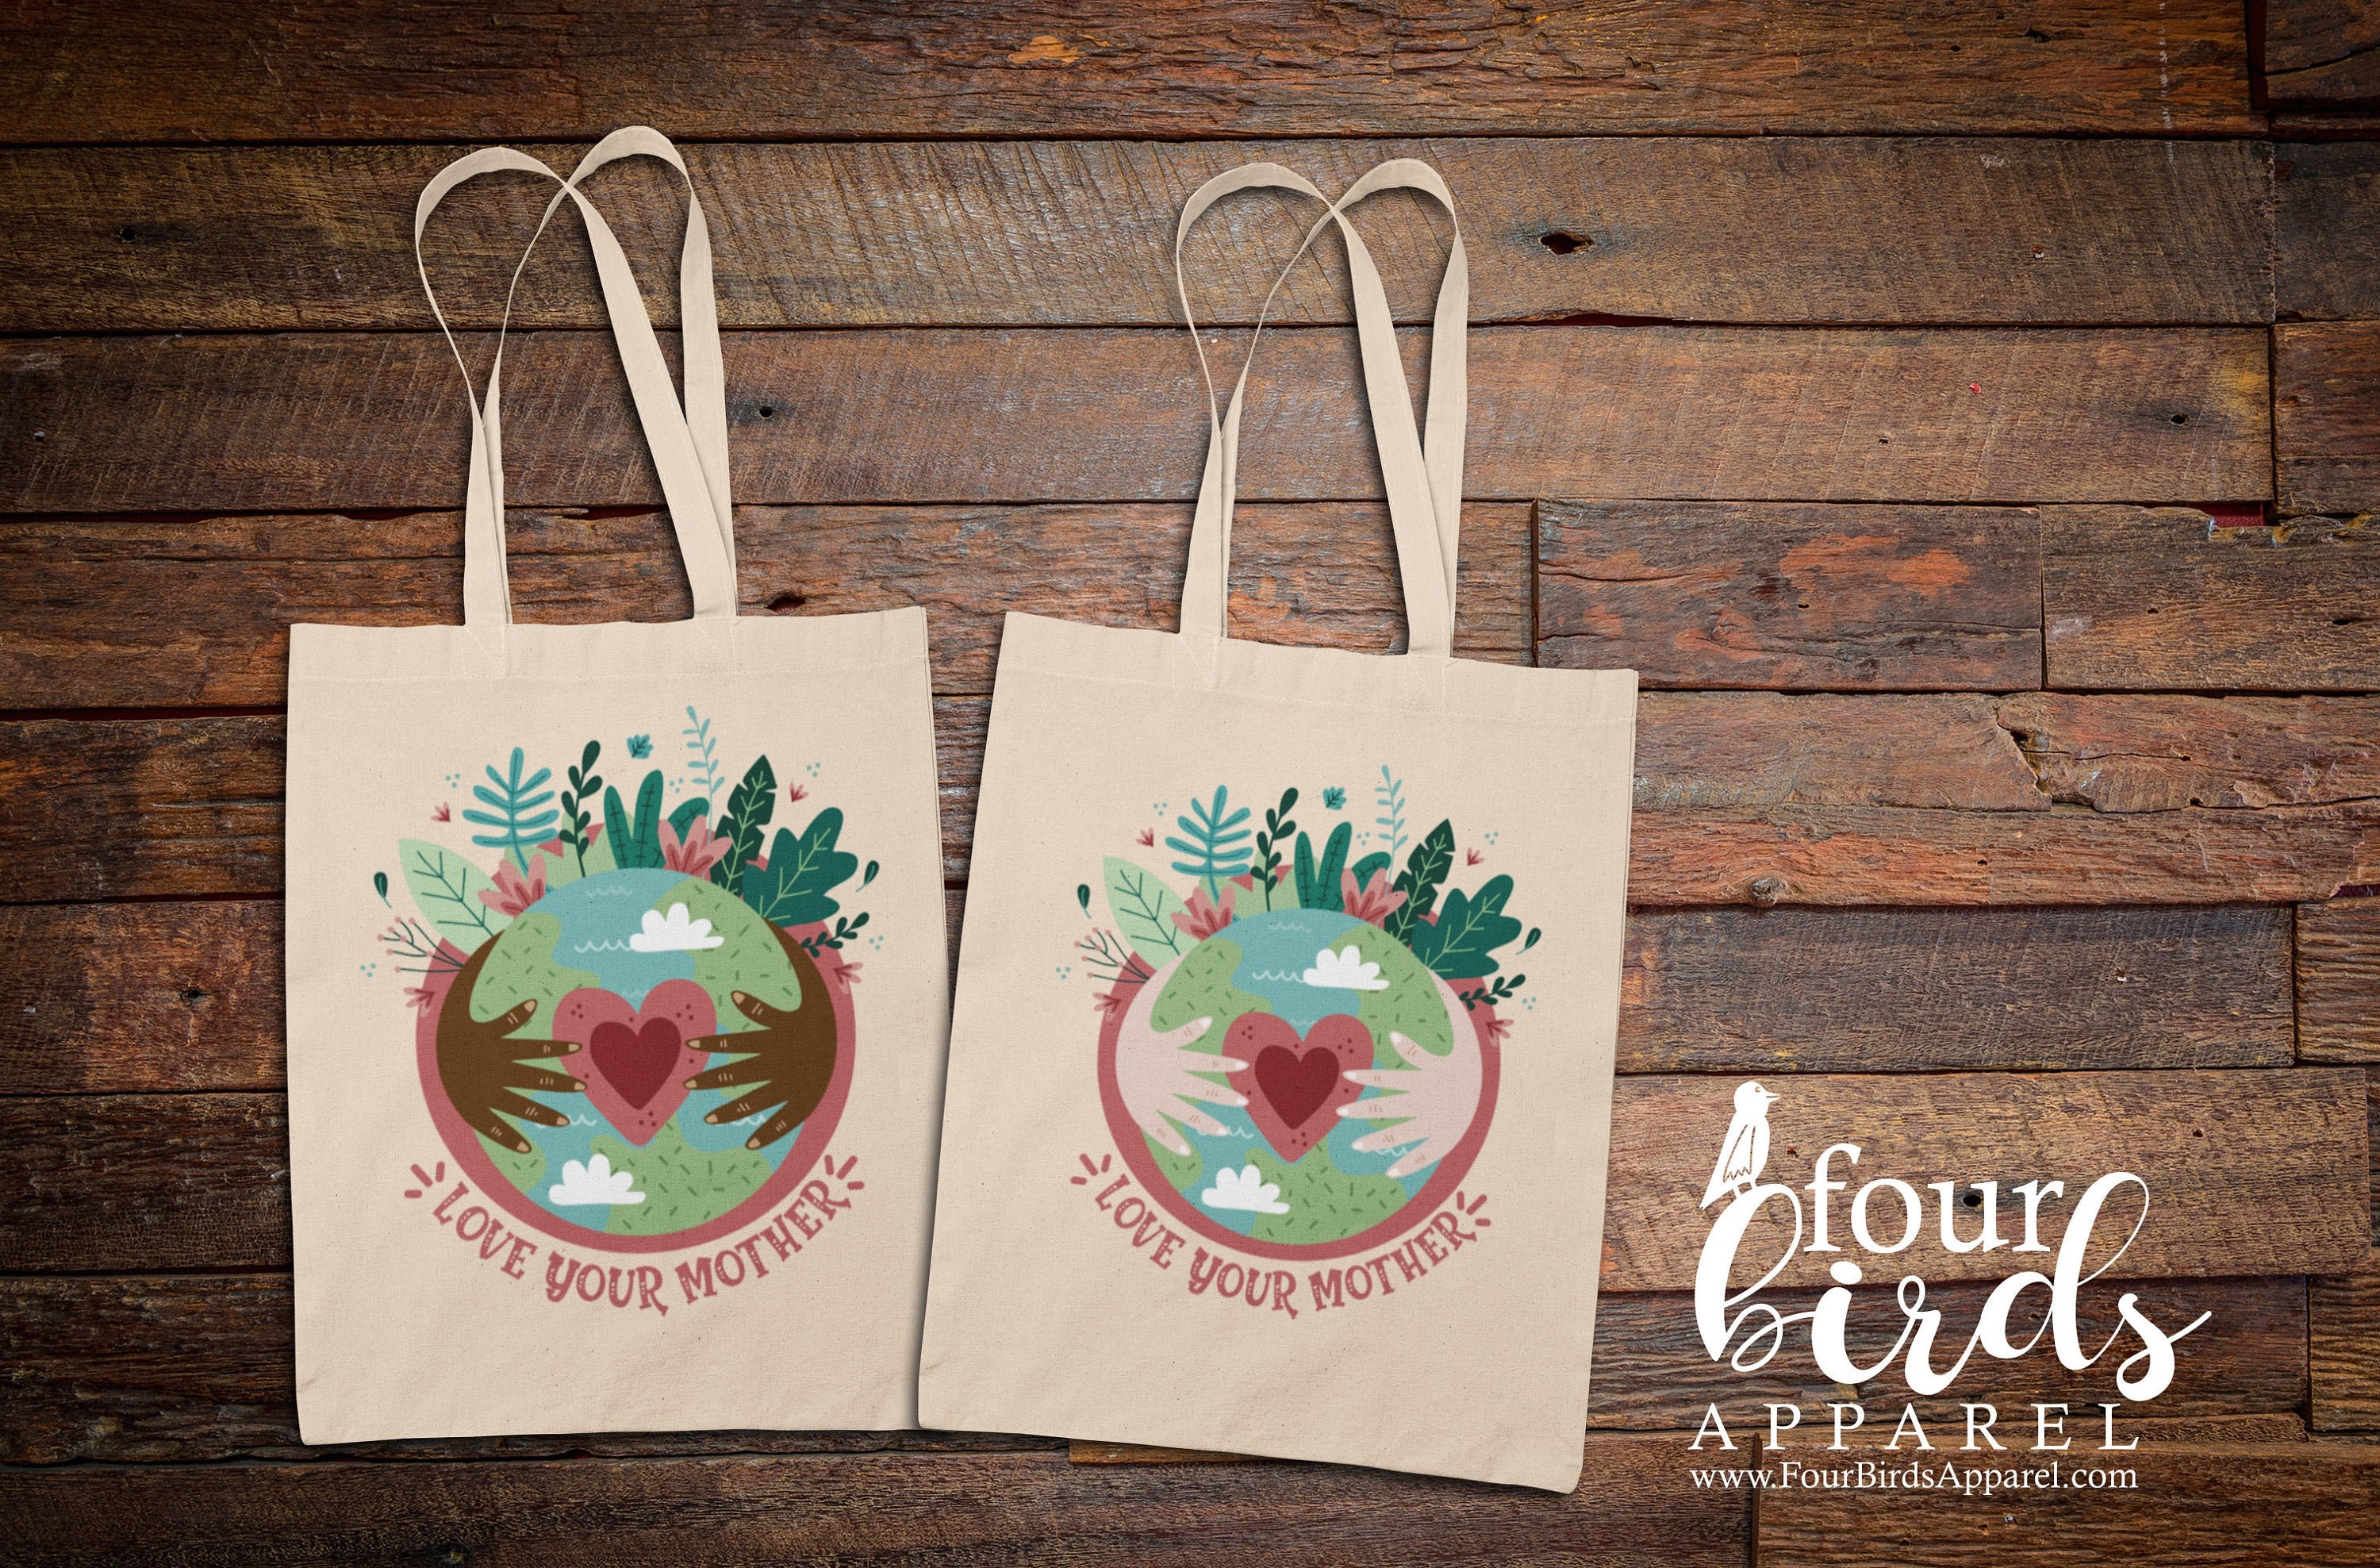 Earth Day Public Goods Sustainable Shopping Bags. — Sarah Christine